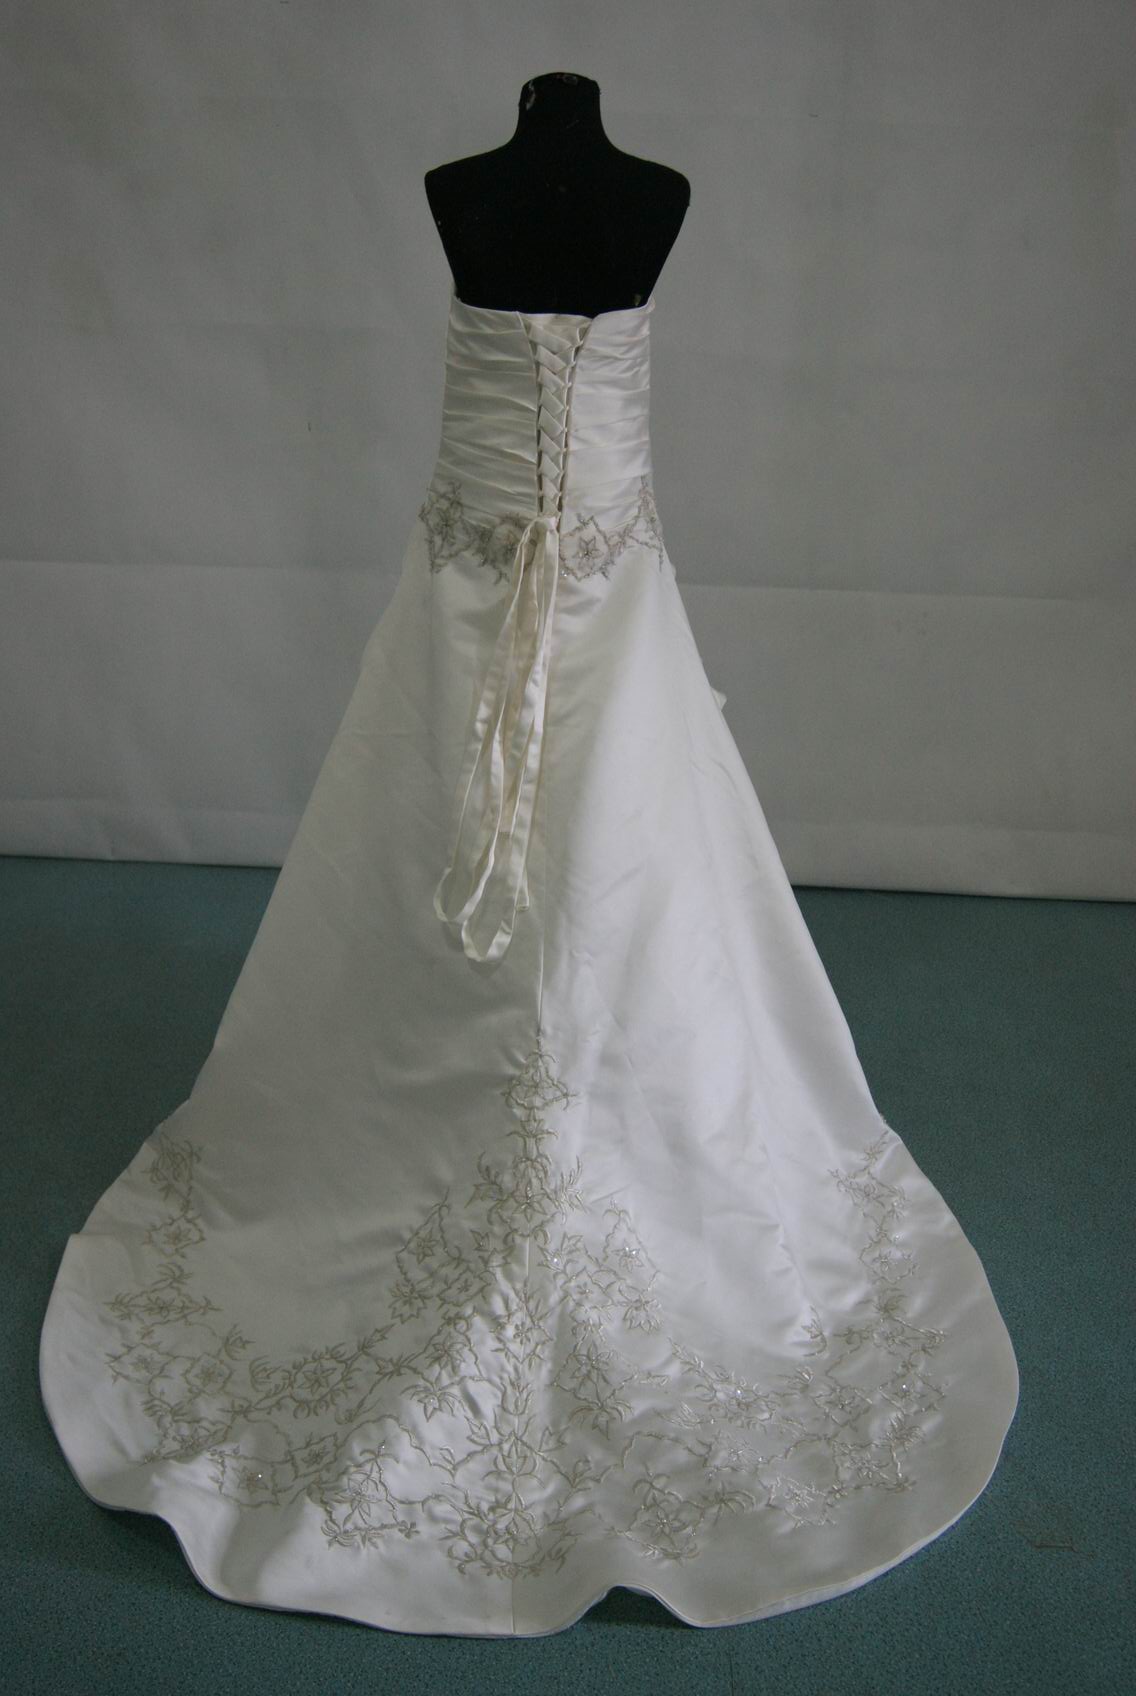 childrens wedding dress with lace up back